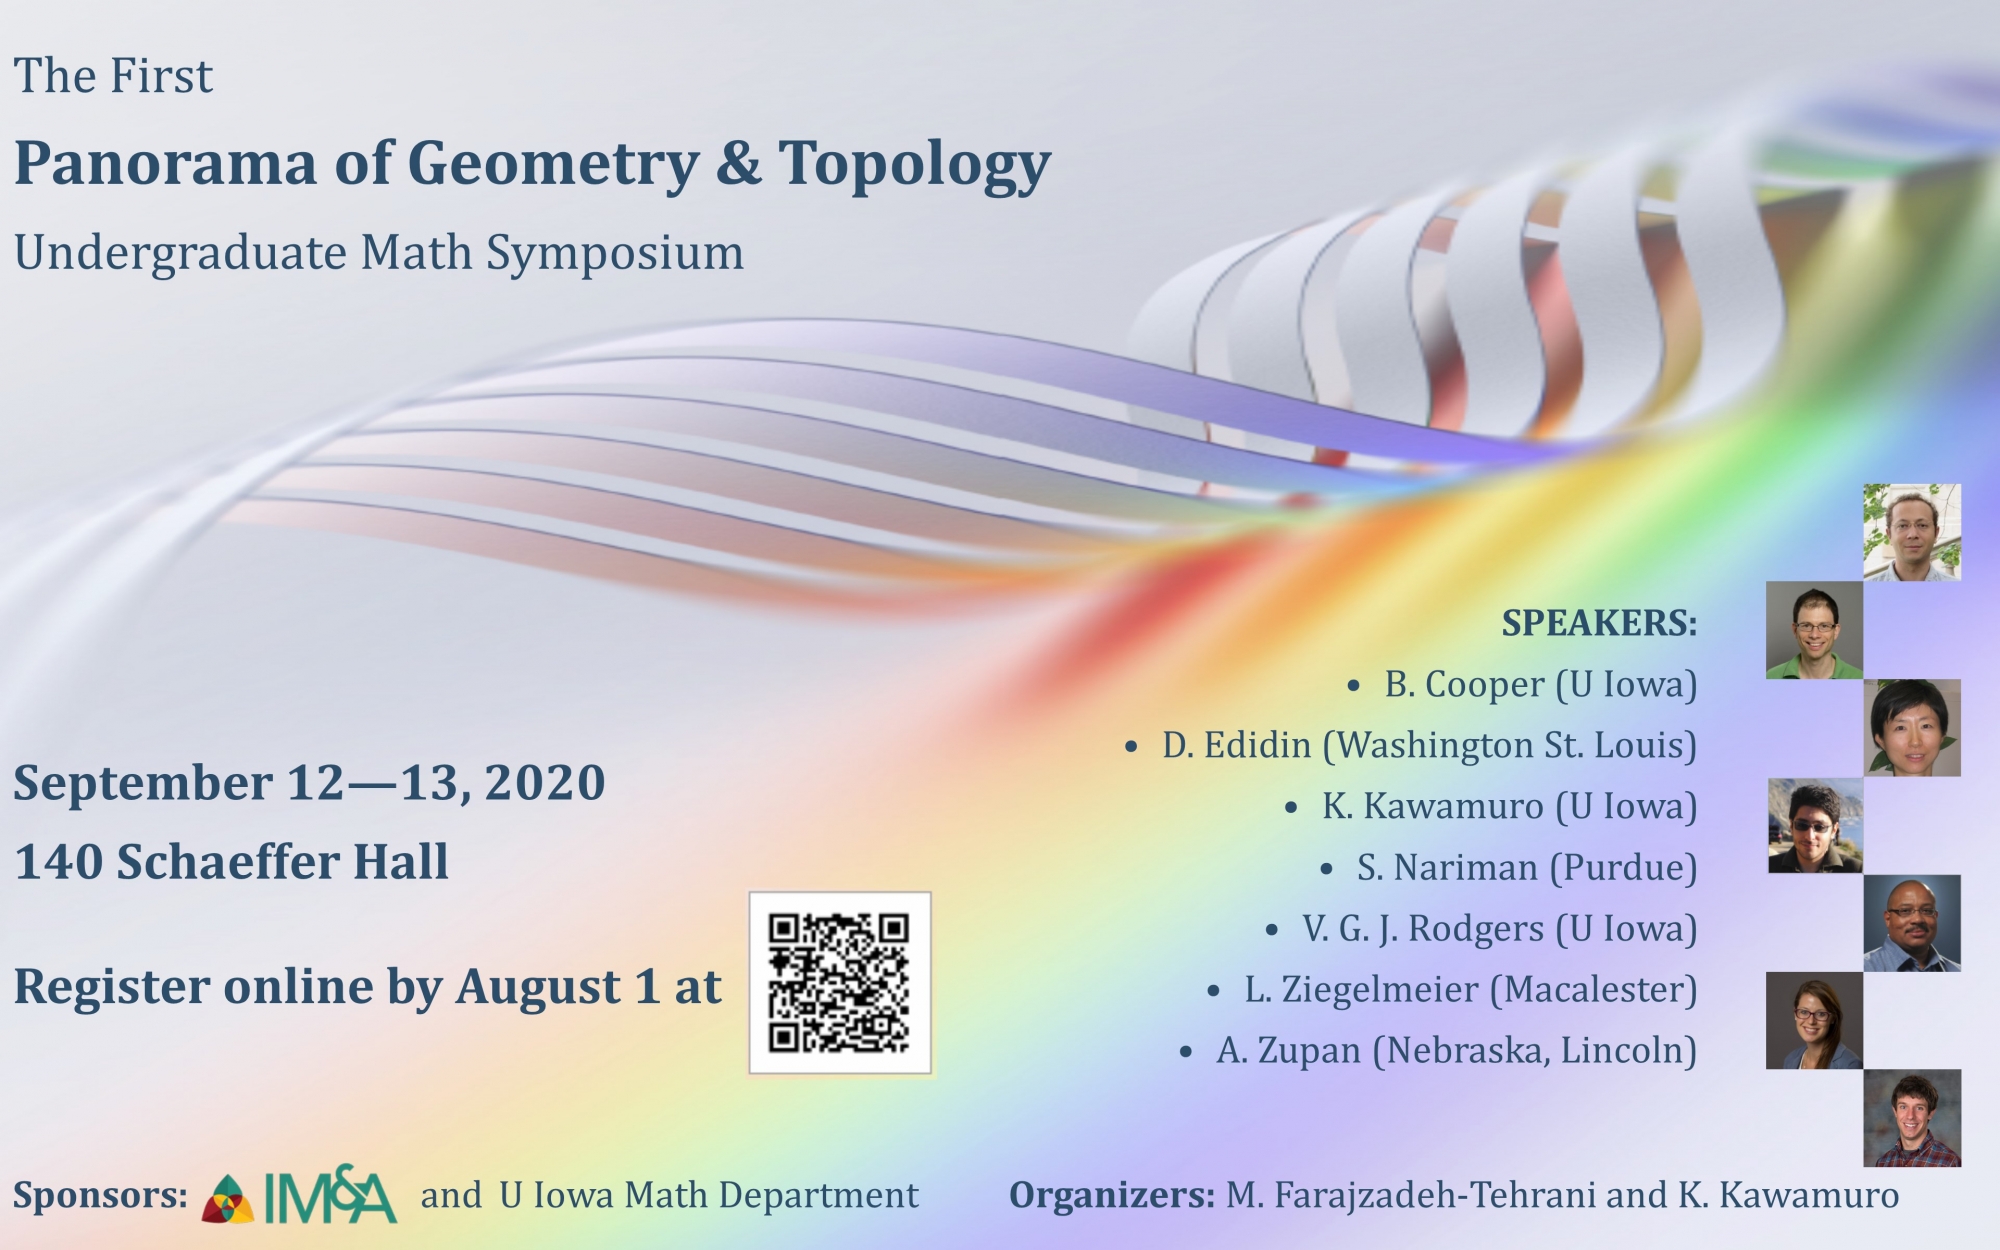 The First Panorama of Geometry & Topology Undergraduate Math Symposium September 12 - 13, 2020 140 Schaeffer Hall Regiseter online by August 1 at 